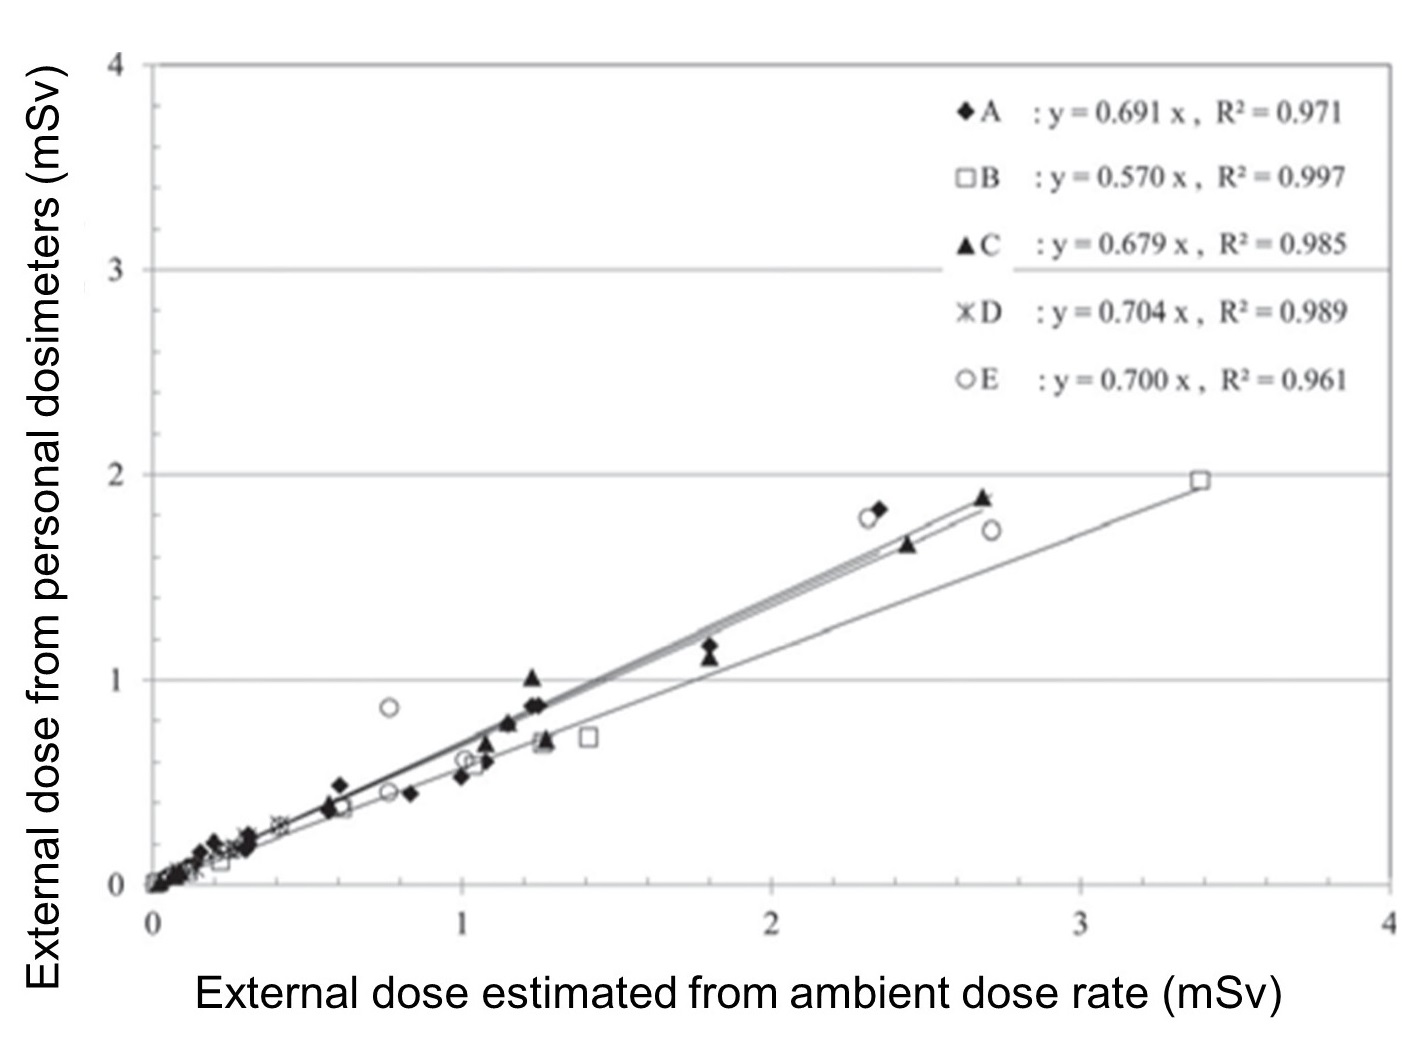 External dose estimated from ambient dose rate